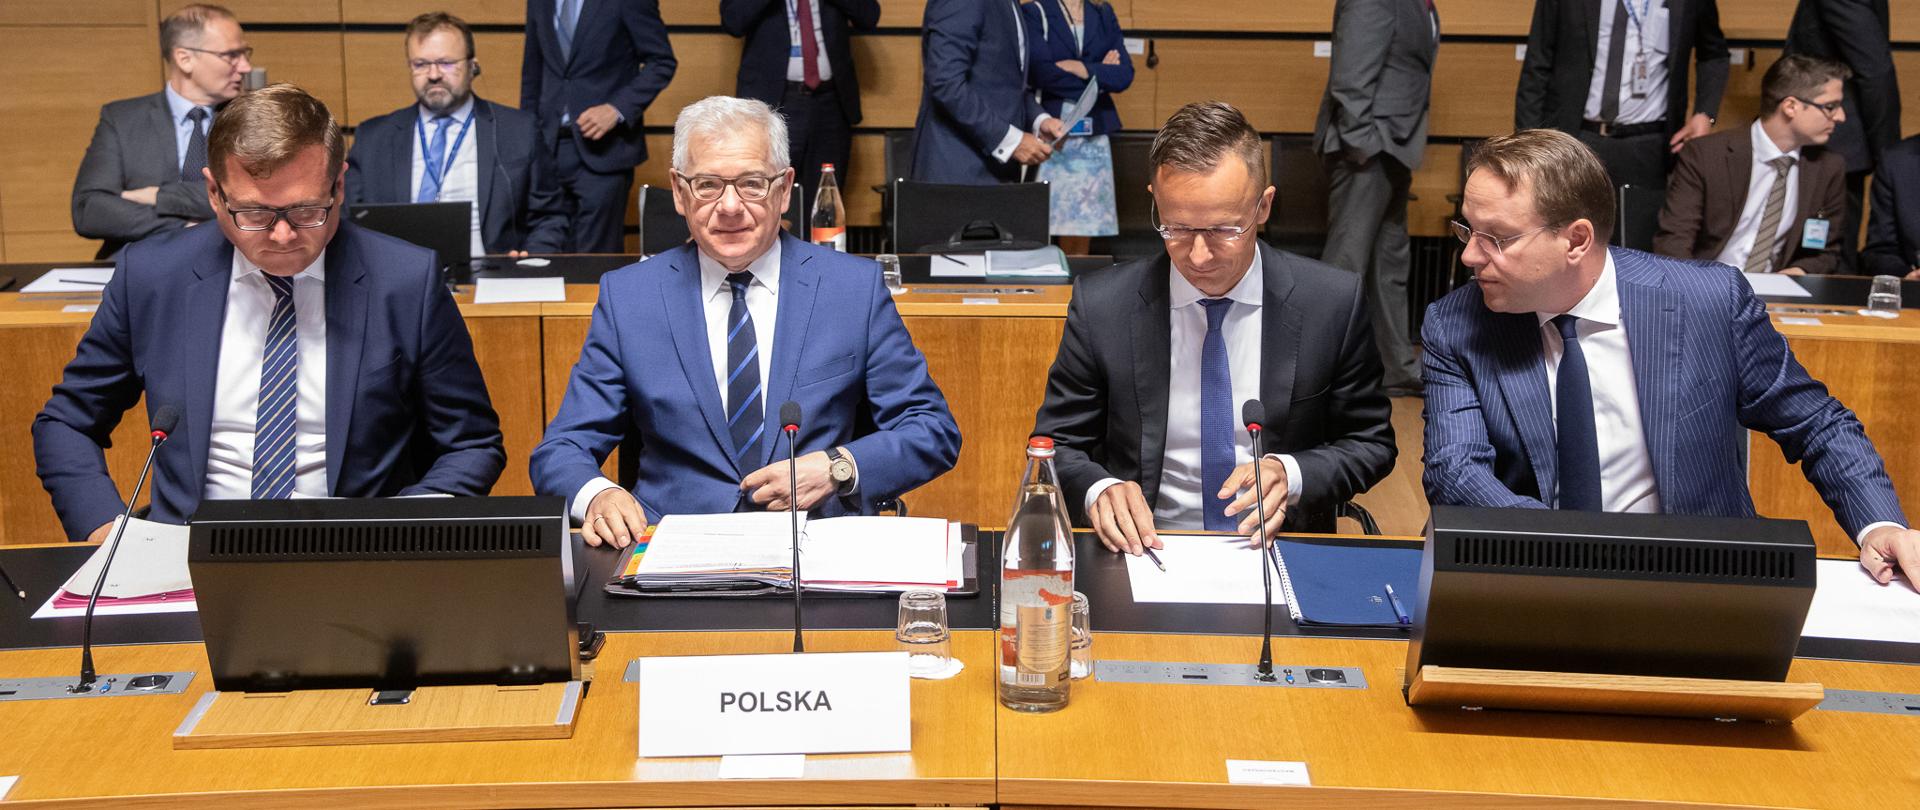 Minister Jacek Czaputowicz attends a Foreign Affairs Council meeting in Luxembourg